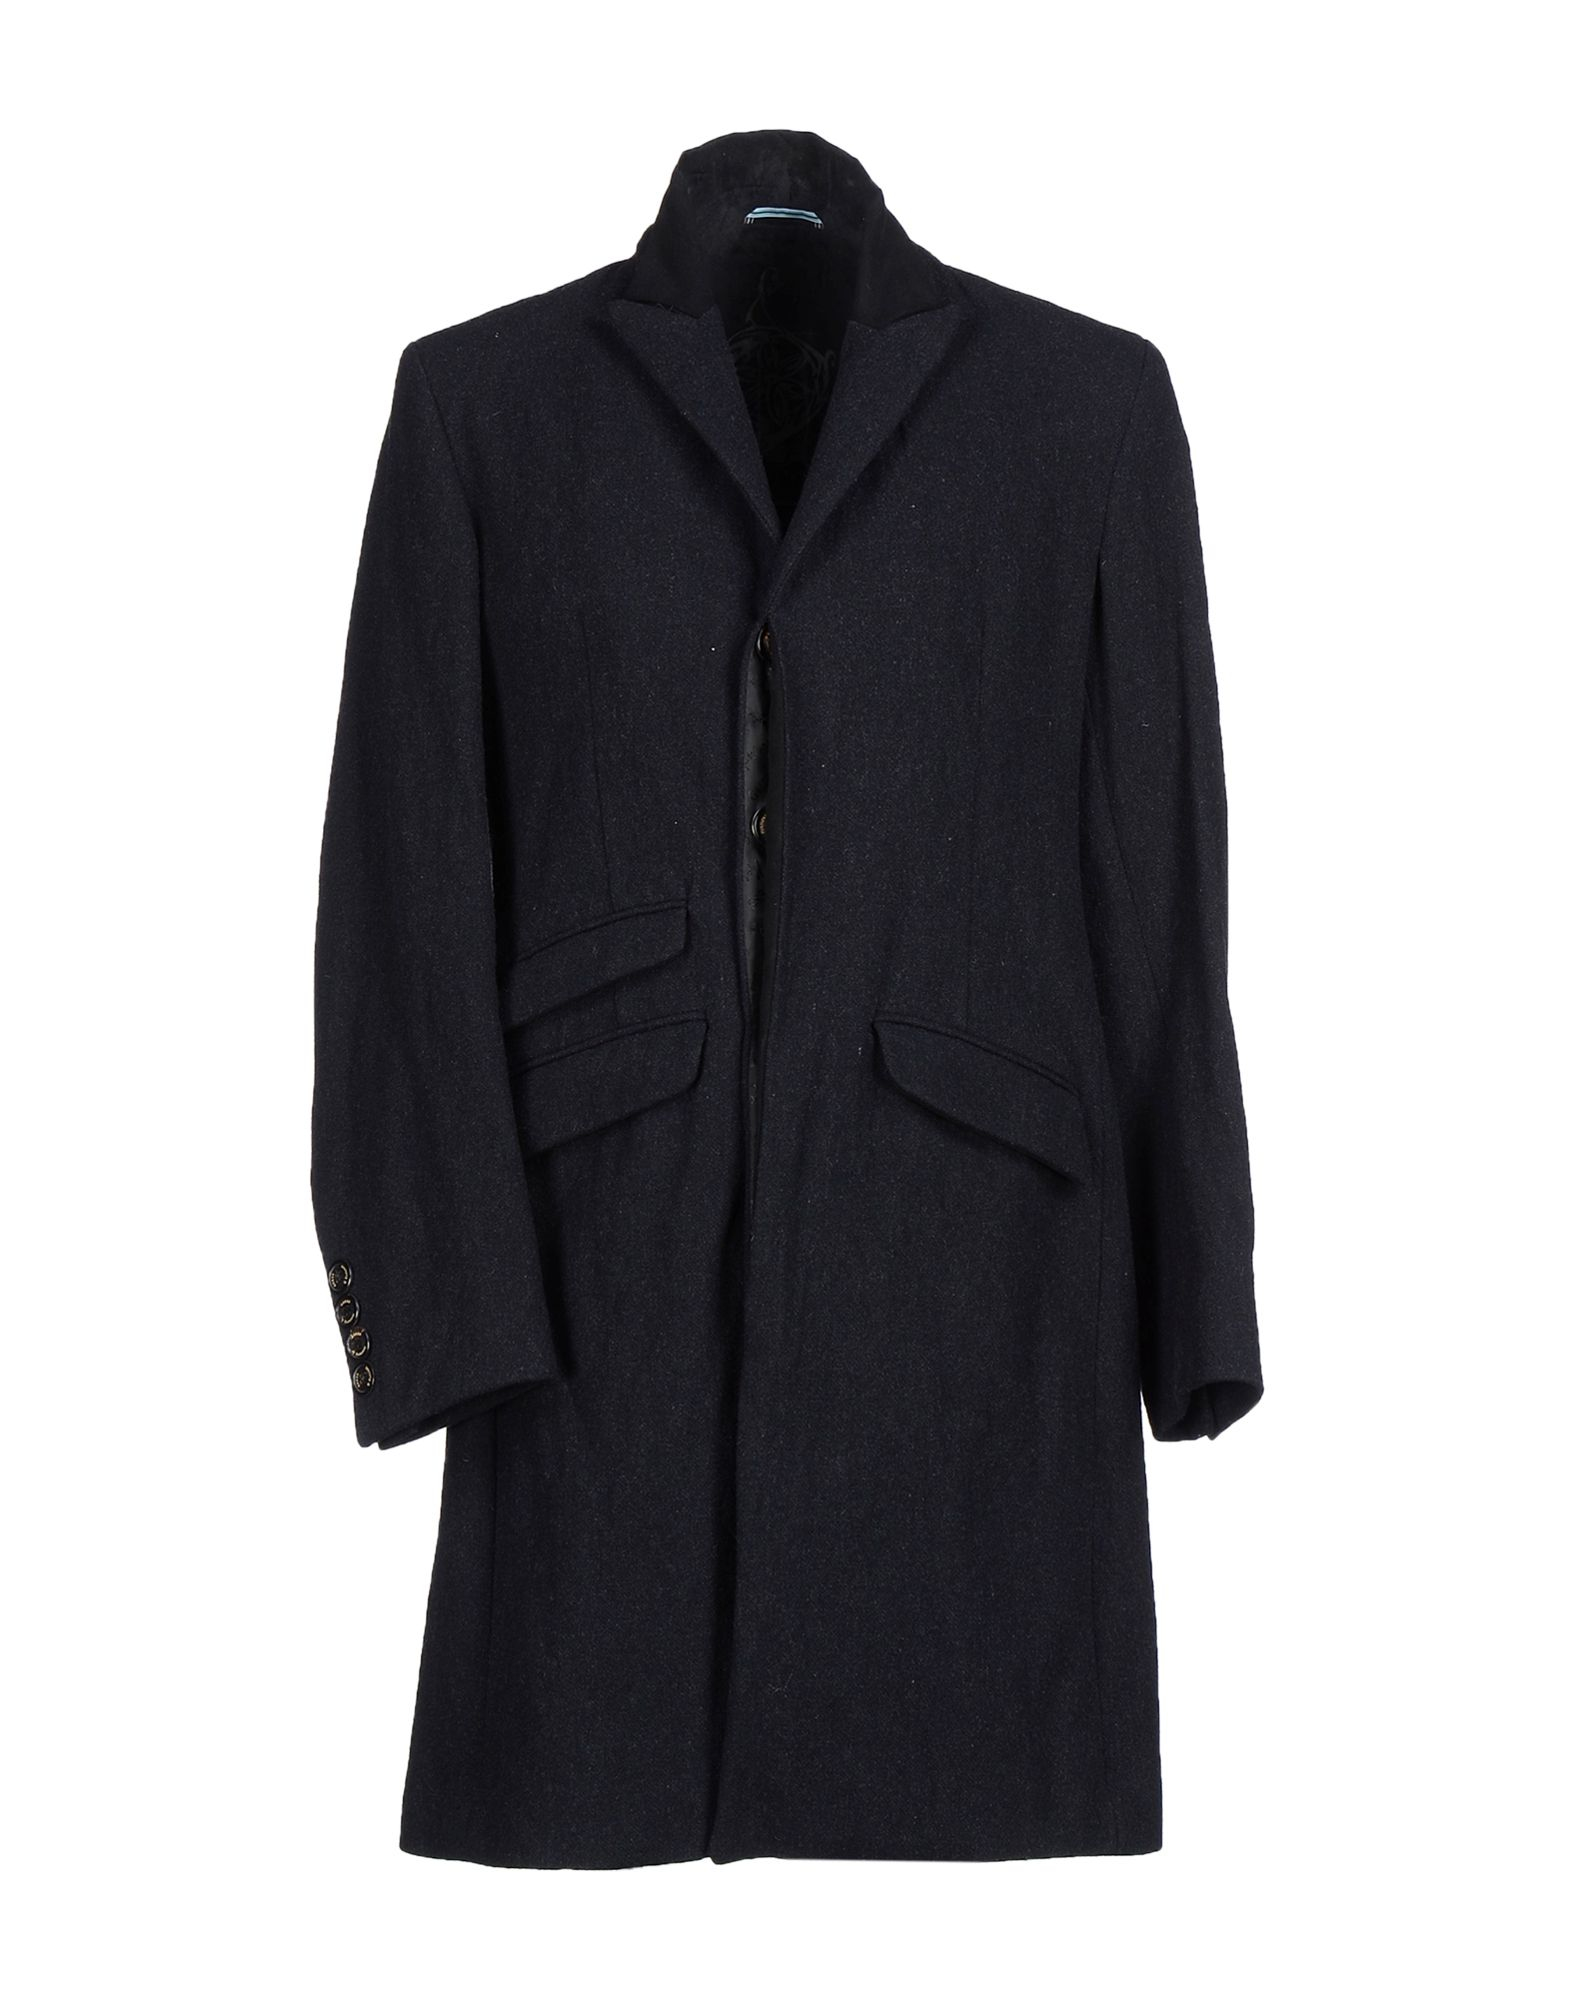 Guess Coat in Blue for Men - Lyst